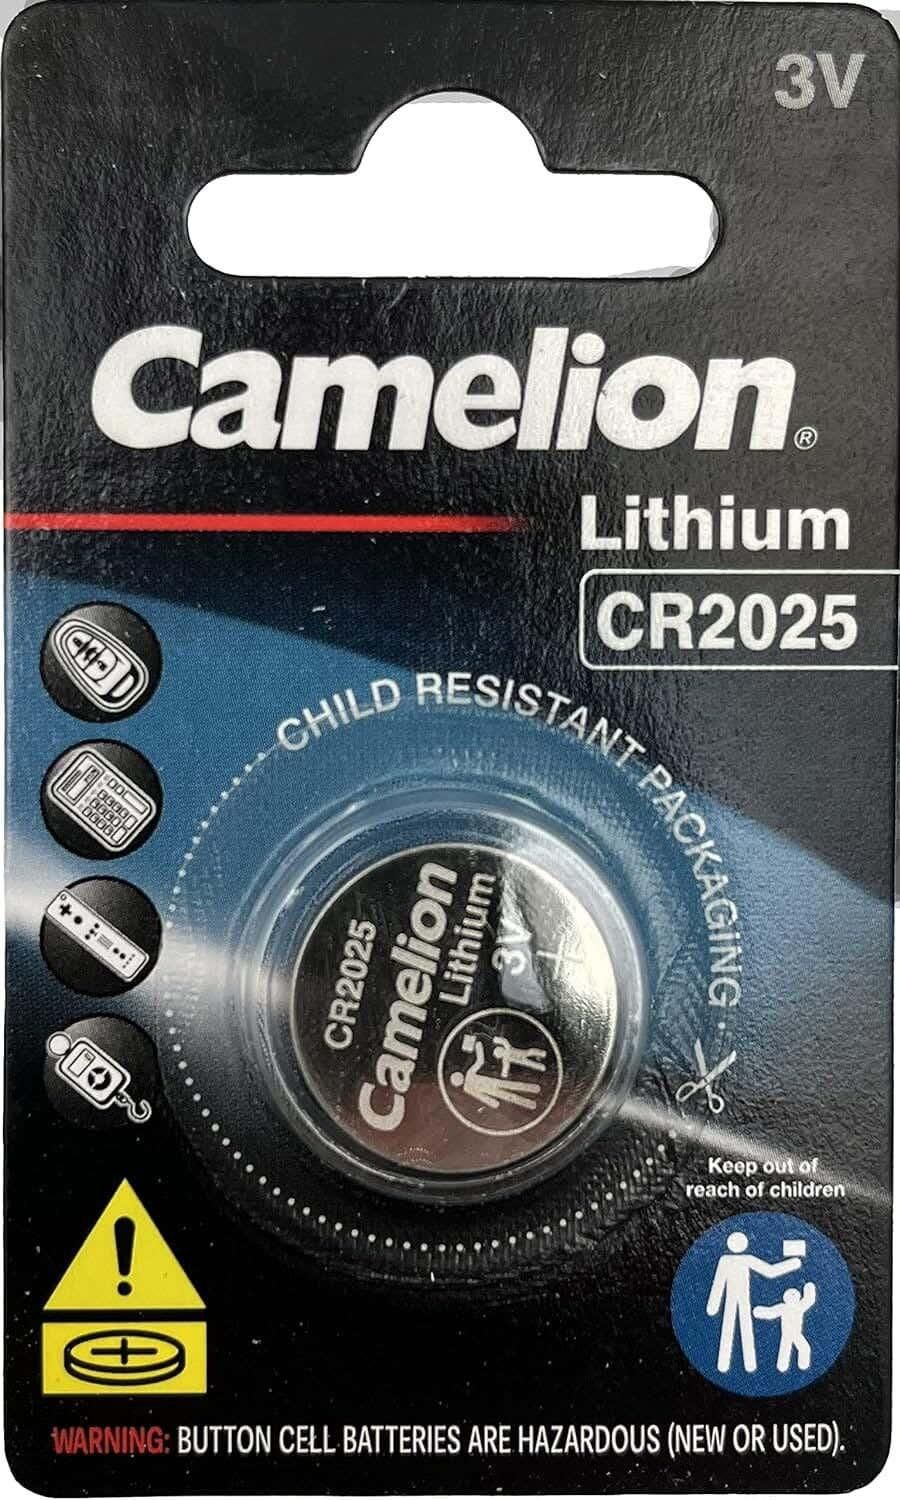 Get Camelion Cr2025 Bution Cell Battery, 3V - Multicolor with best offers | Raneen.com